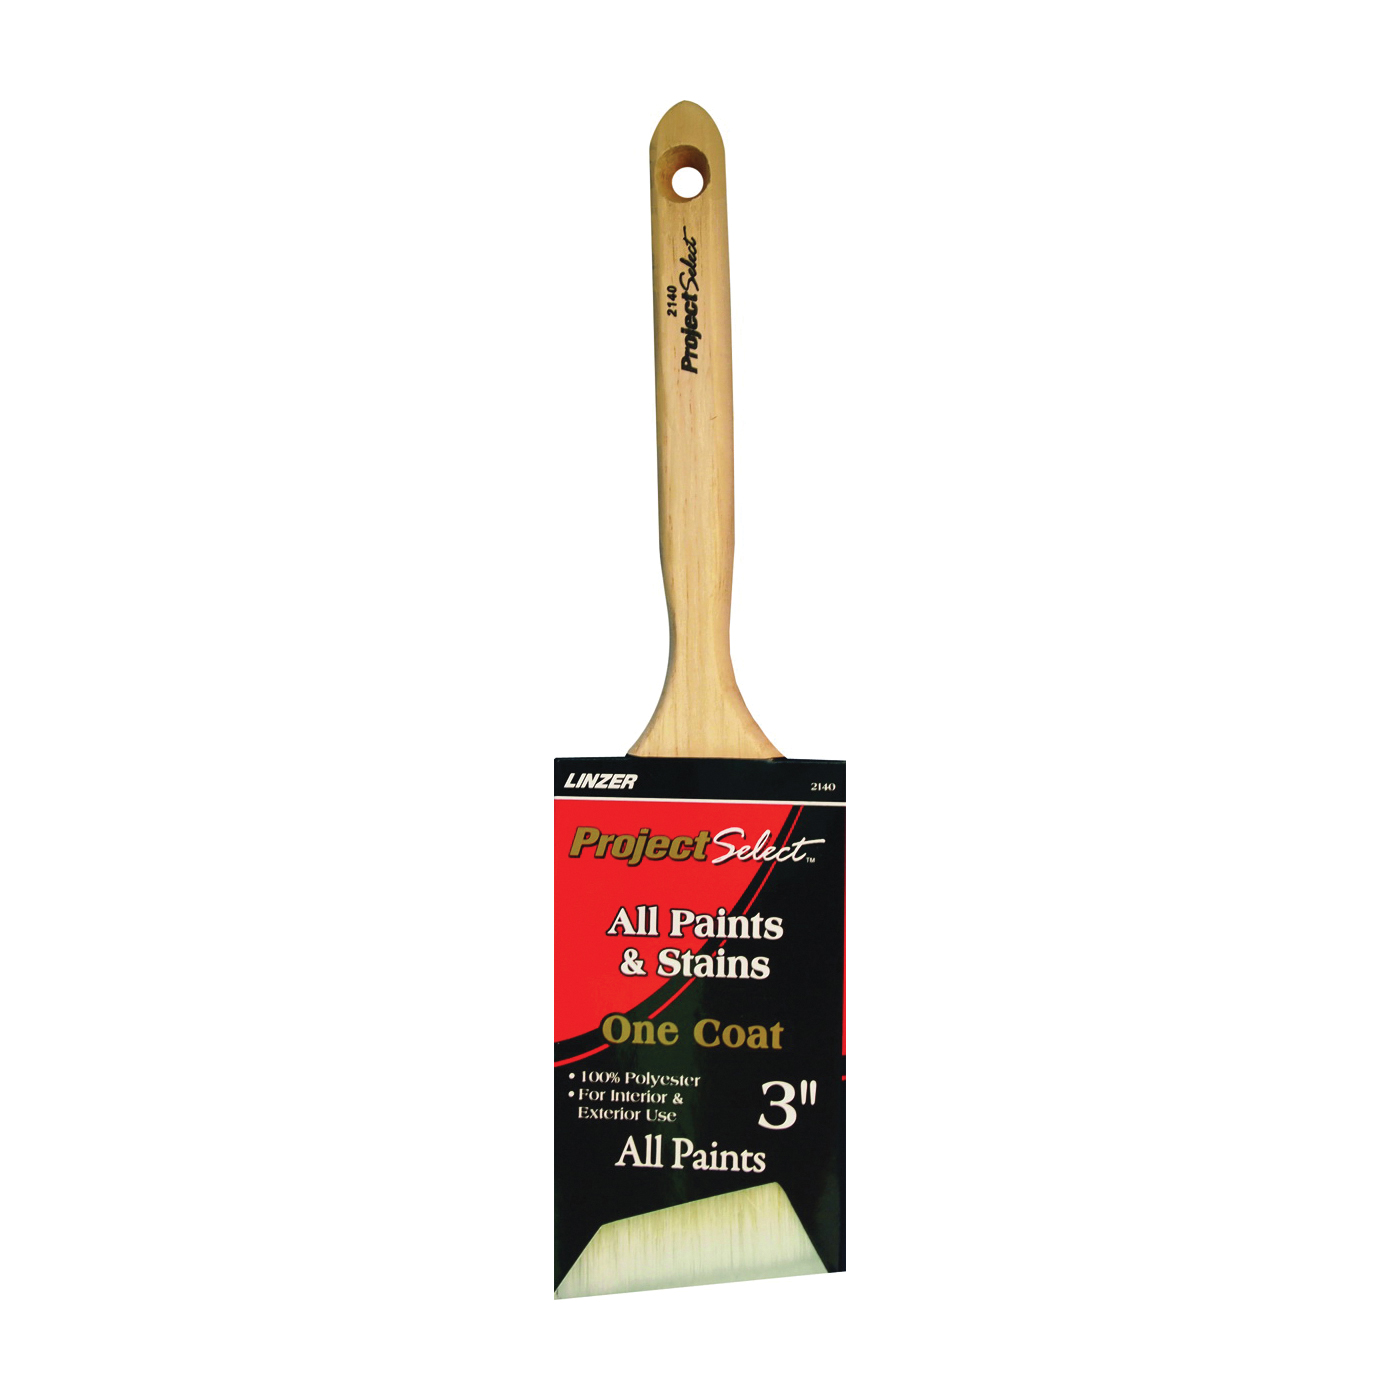 WC 2140-3 Paint Brush, 3 in W, 3-1/4 in L Bristle, Polyester Bristle, Sash Handle